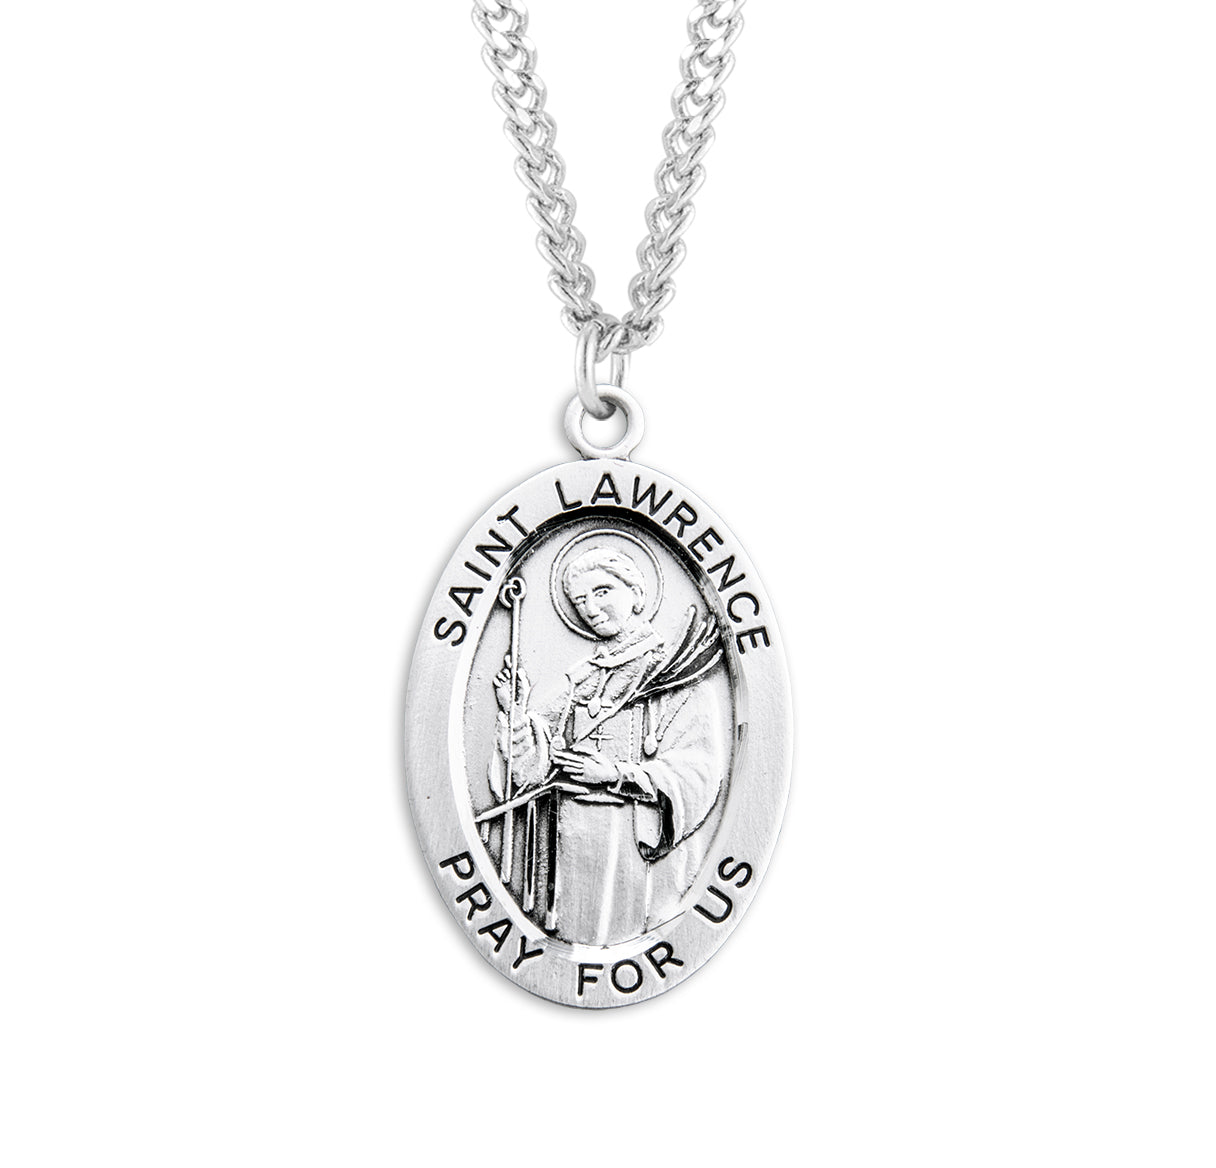 Patron Saint Lawrence Oval Sterling Silver Medal